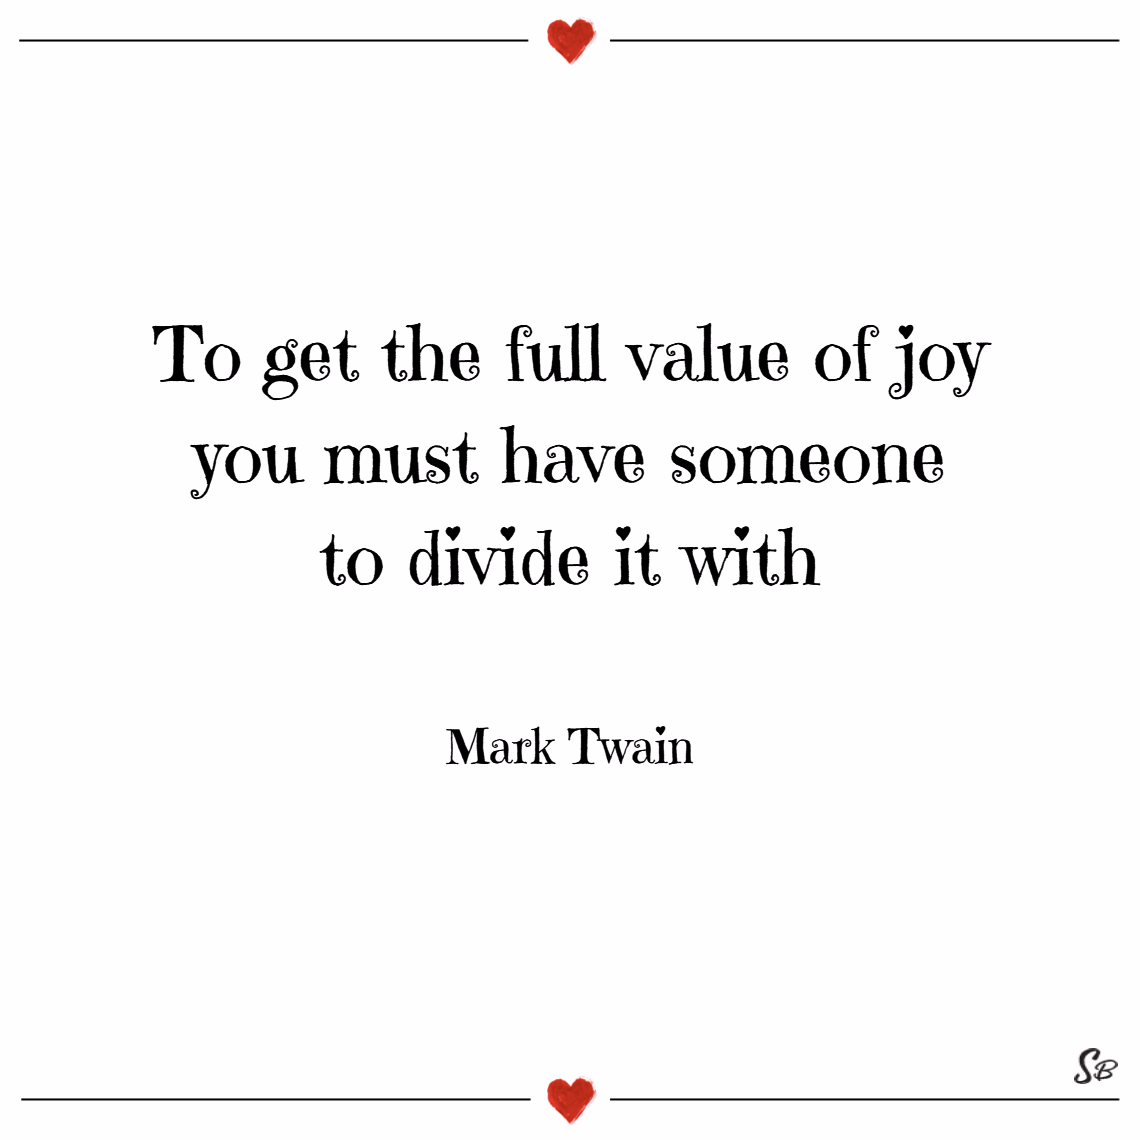 To get the full value of joy, you must have someone to divide it with. Mark Twain